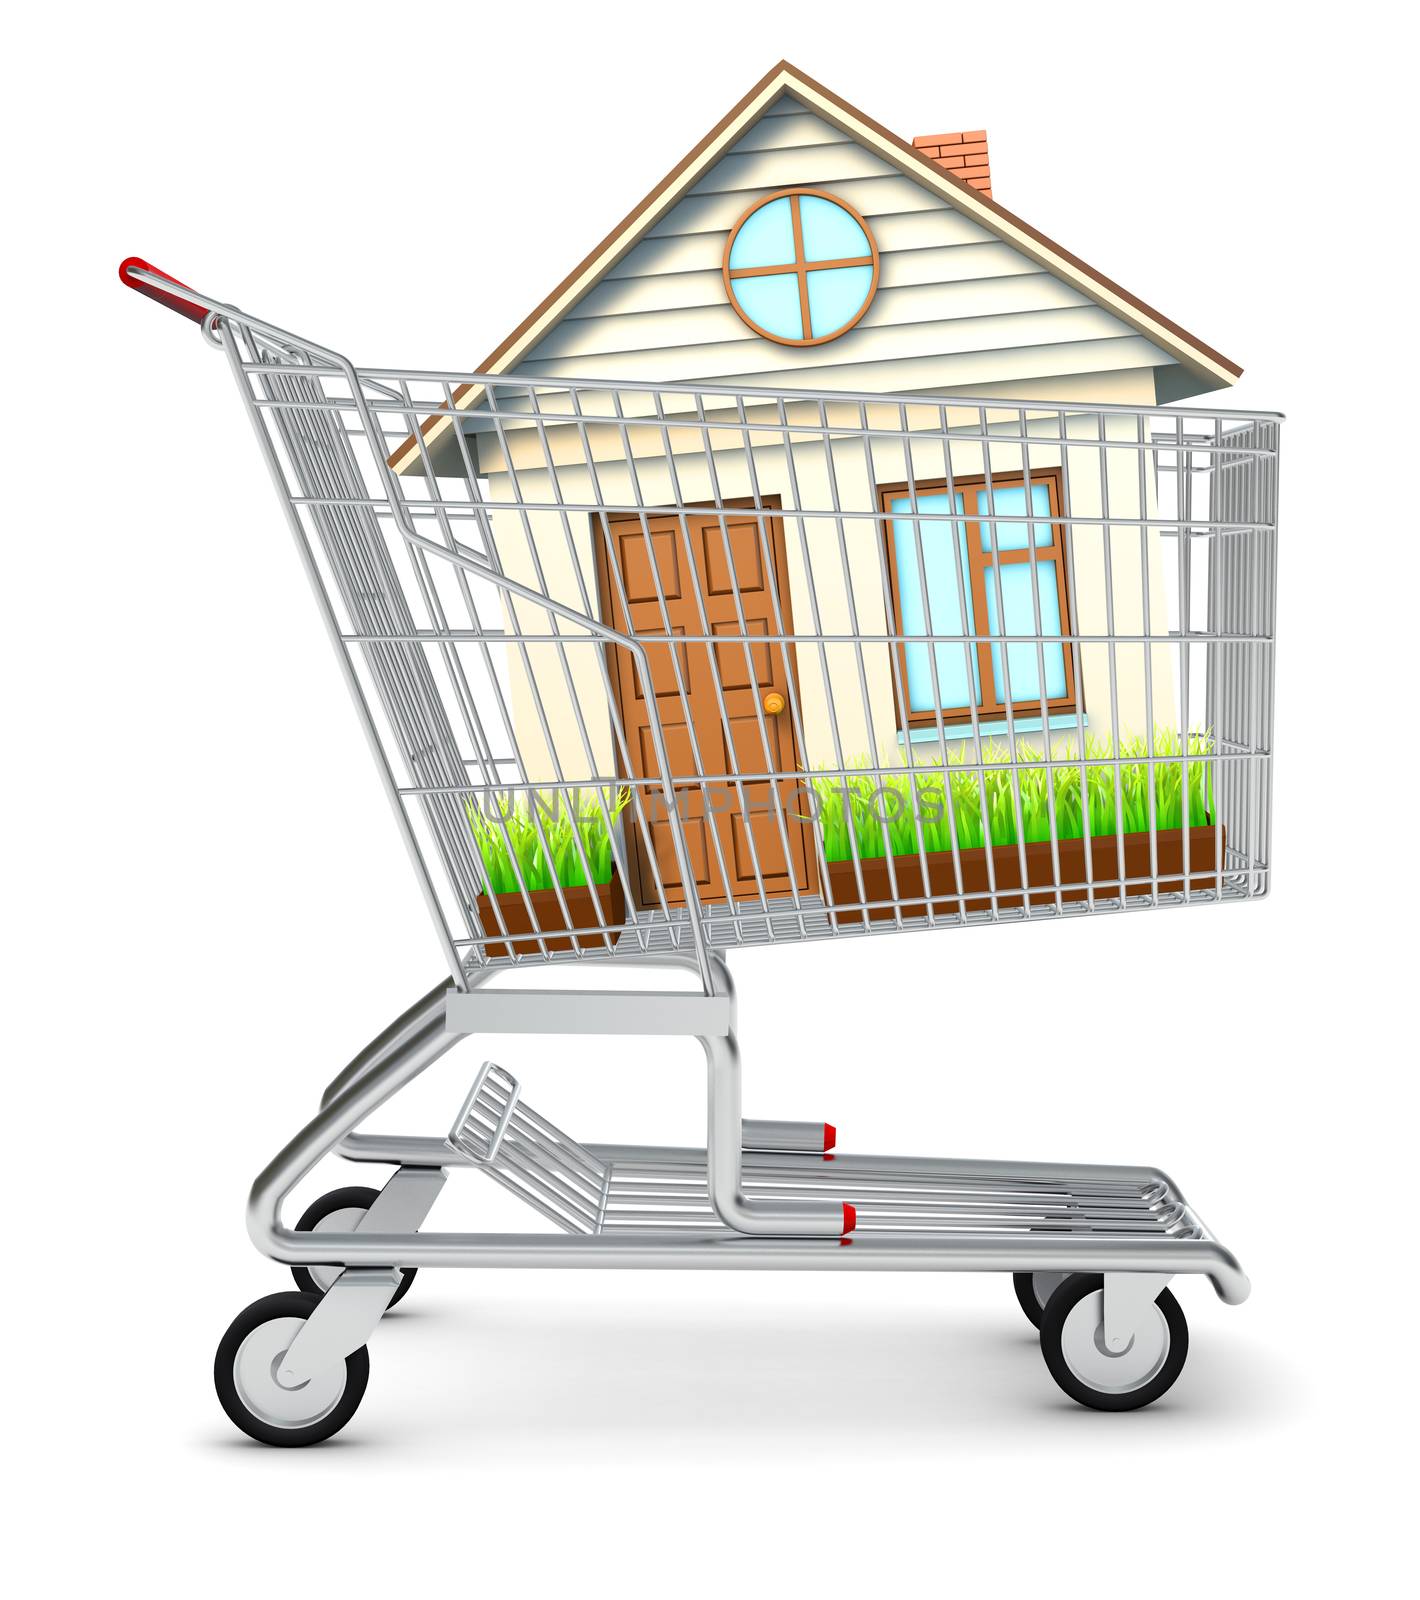 House in shopping cart by cherezoff